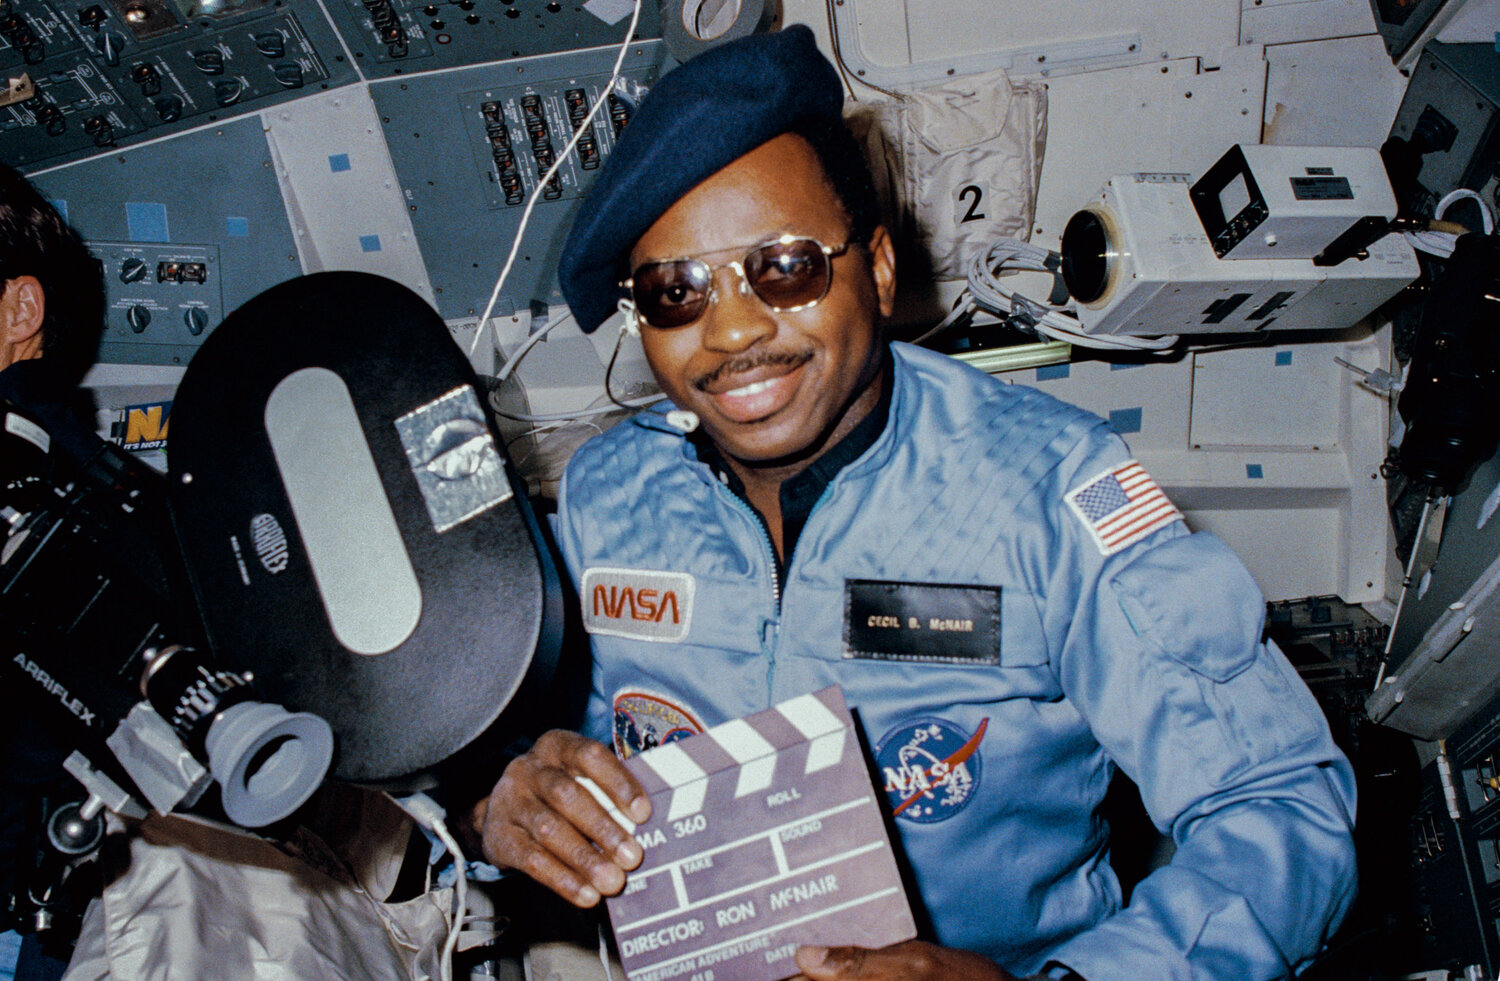 Astronaut Ronald E. McNair, 41-B mission specialist, doubles as "director" for a movie being "produced" aboard the Earth-orbiting Space Shuttle Challenger in February 1984. McNairís name tag ("Cecil B. McNair"), beret and slate are all humorous props for application of a serious piece of cargo on this eight day flight - the Cinema 360 camera. Two of the cameras were carried aboard the Challenger to provide a test for motion picture photography in a unique format designed especially for planetarium viewing. This camera was located in the crew cabin area and a second was stowed in a getaway special (GAS) canister in the payload bay.